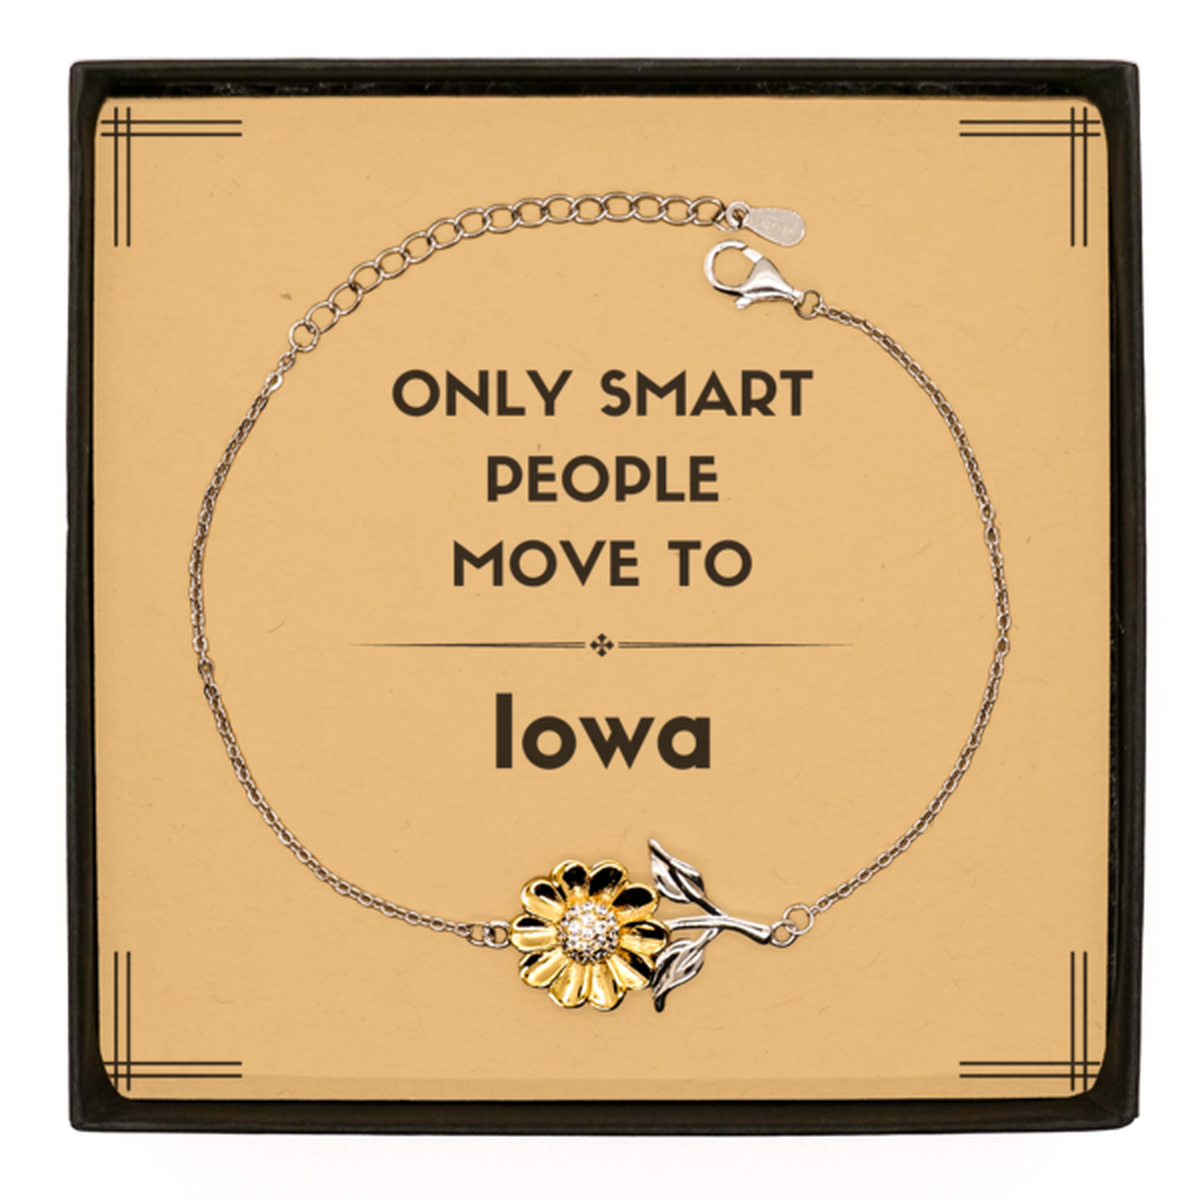 Only smart people move to Iowa Sunflower Bracelet, Message Card Gifts For Iowa, Move to Iowa Gifts for Friends Coworker Funny Saying Quote